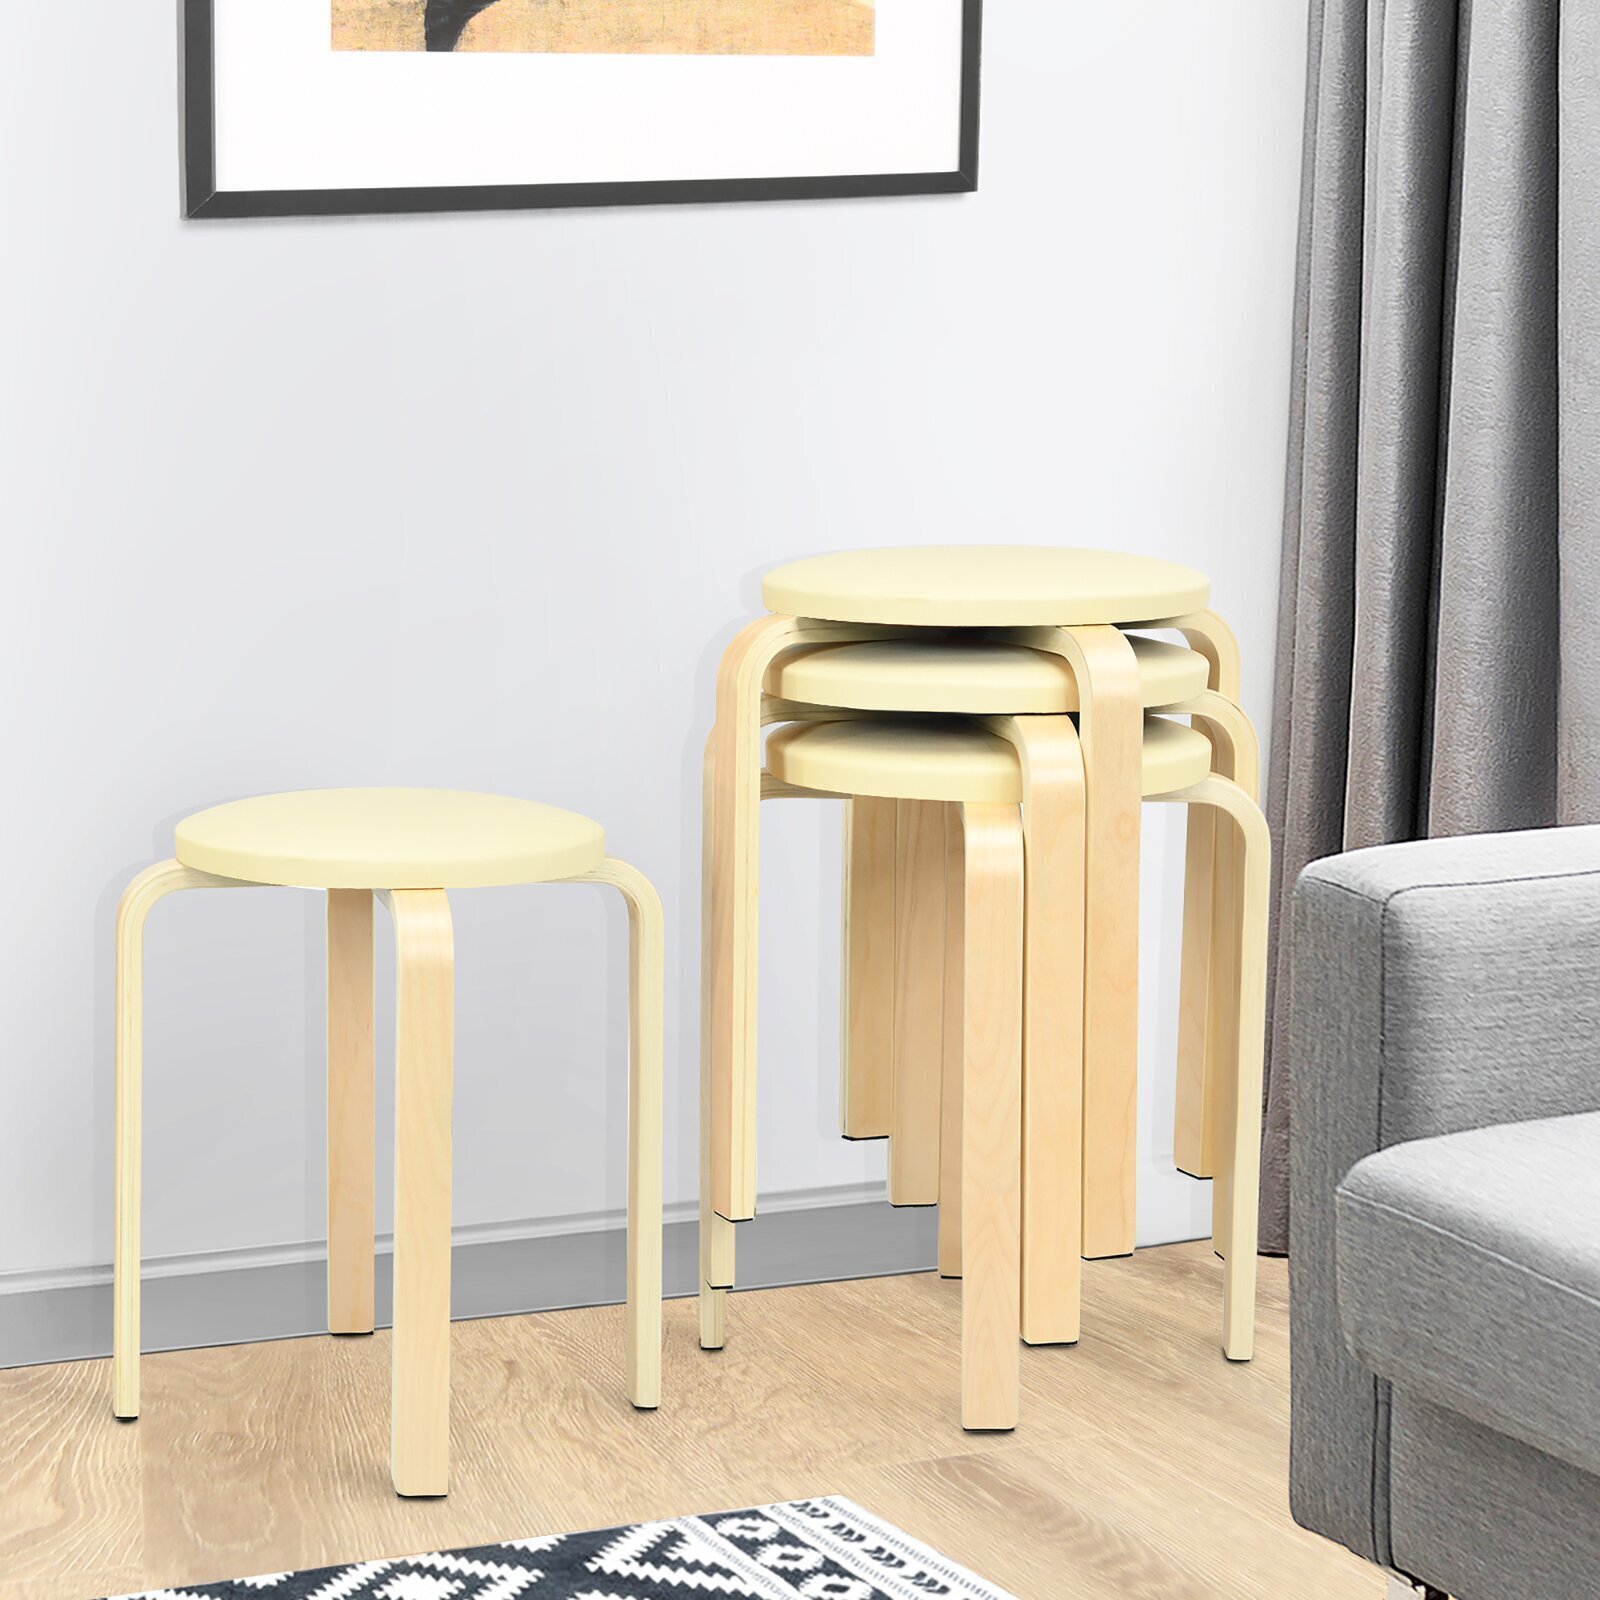 Minimalistic Wooden Stacking Stools